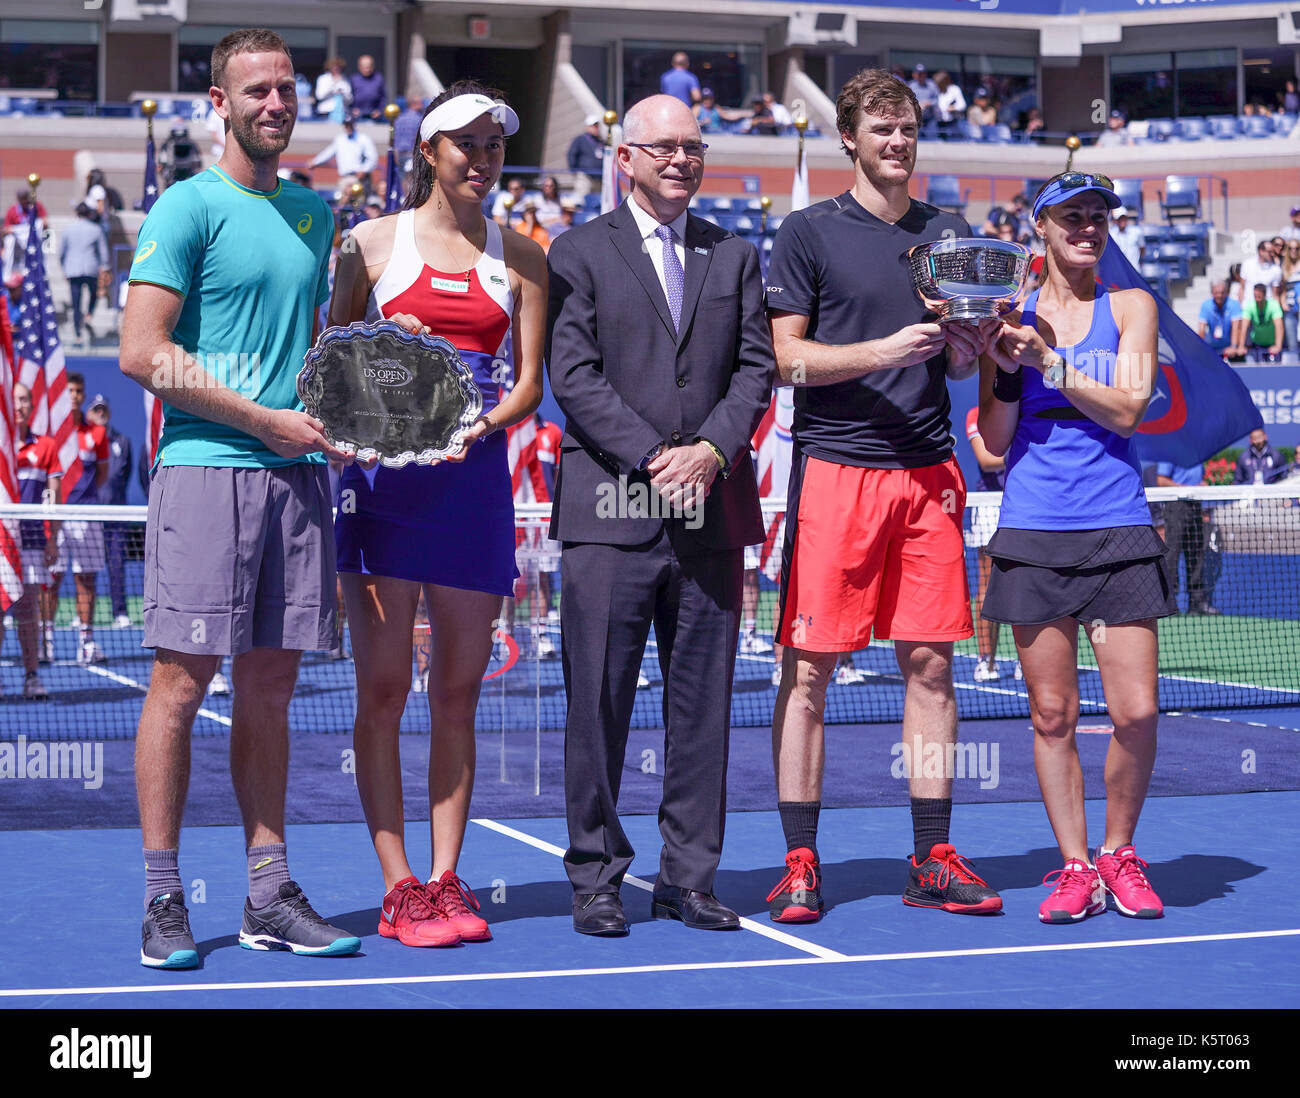 New York, United States. 09th Sep, 2017. Mixed doubles champions Jamie Murray of Great Britain & Martina Hingis of Switzerland & runner-up Hao-Ching Chan of Chinese Taipei & Michael Venus of New Zealand pose with trophy at US Open tennis tournament at Billie Jean King National Tennis Center Credit: Lev Radin/Pacific Press/Alamy Live News Stock Photo